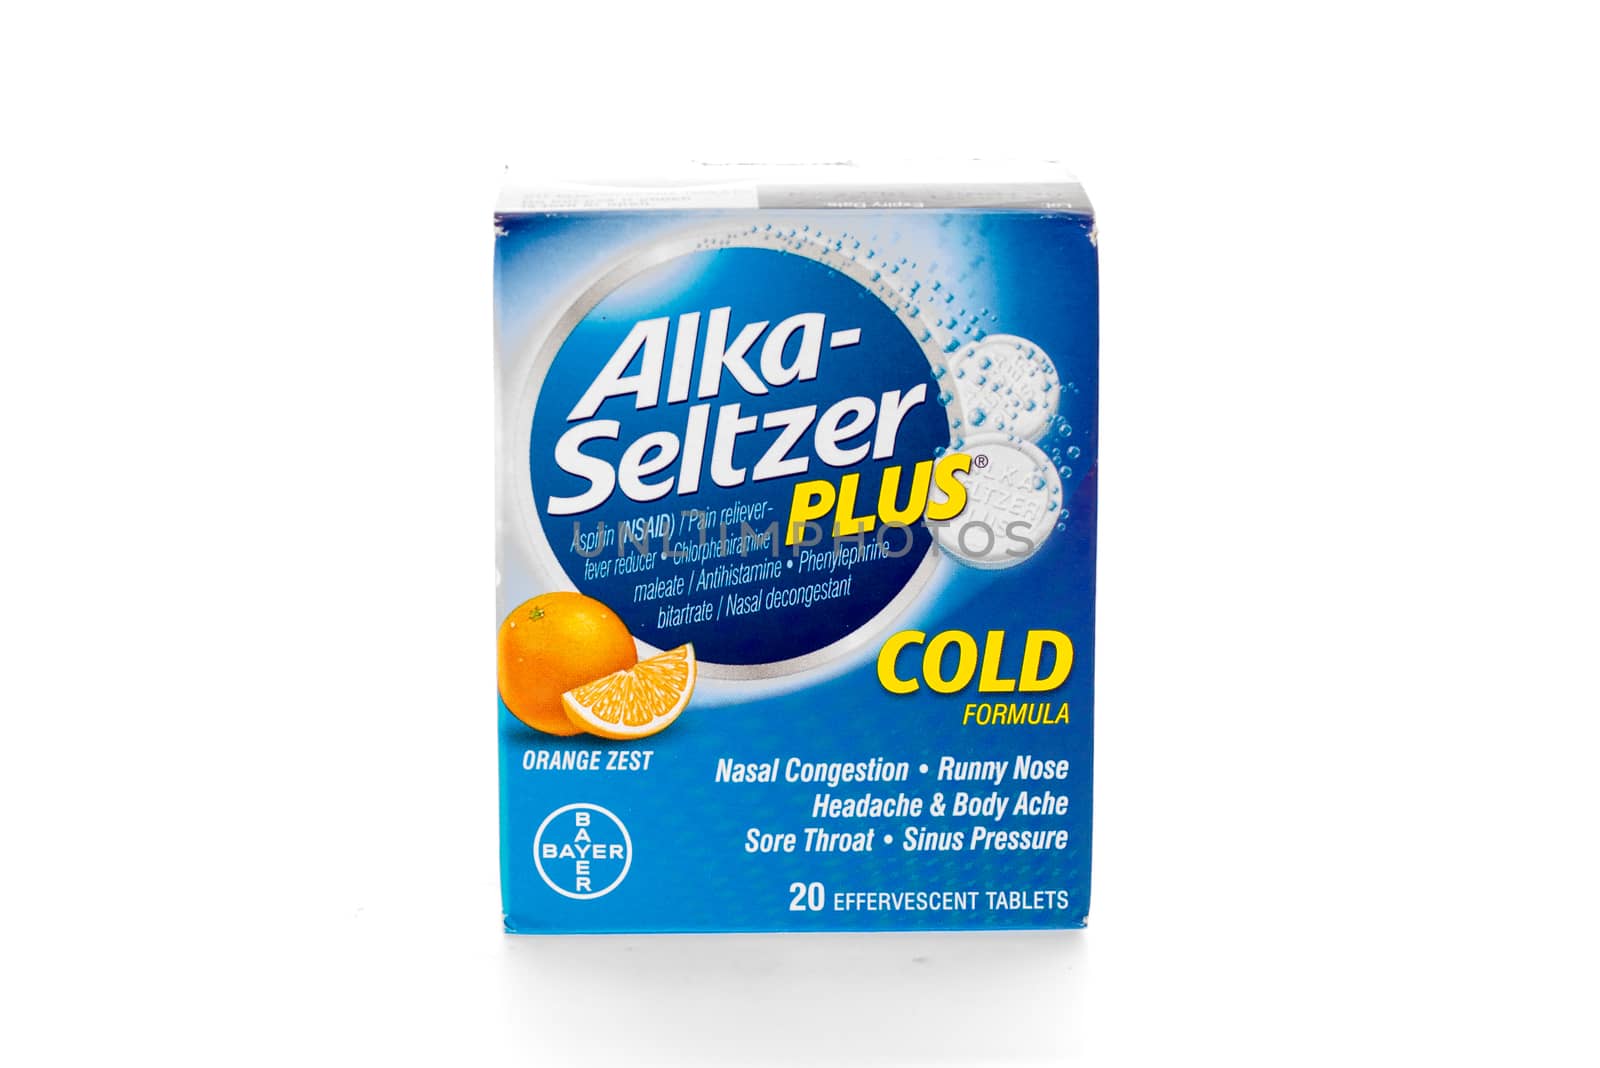 Winneconne, WI - 9 February 2015: Package of Alka-Seltzer Plus cold formula.